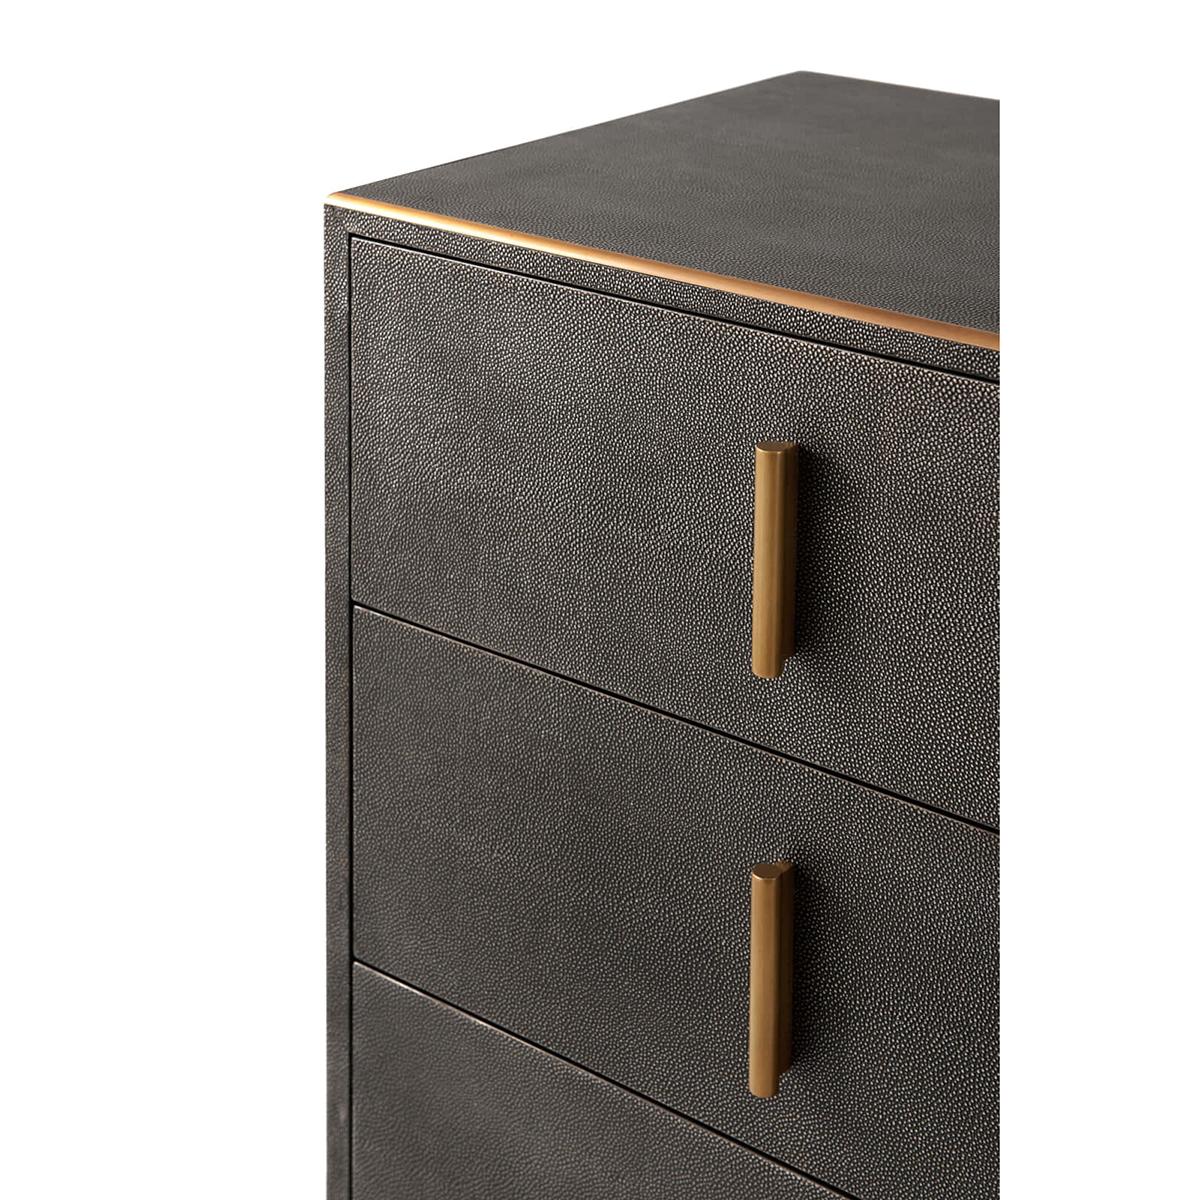 Contemporary Modern Leather Chest of Drawers, Dark For Sale